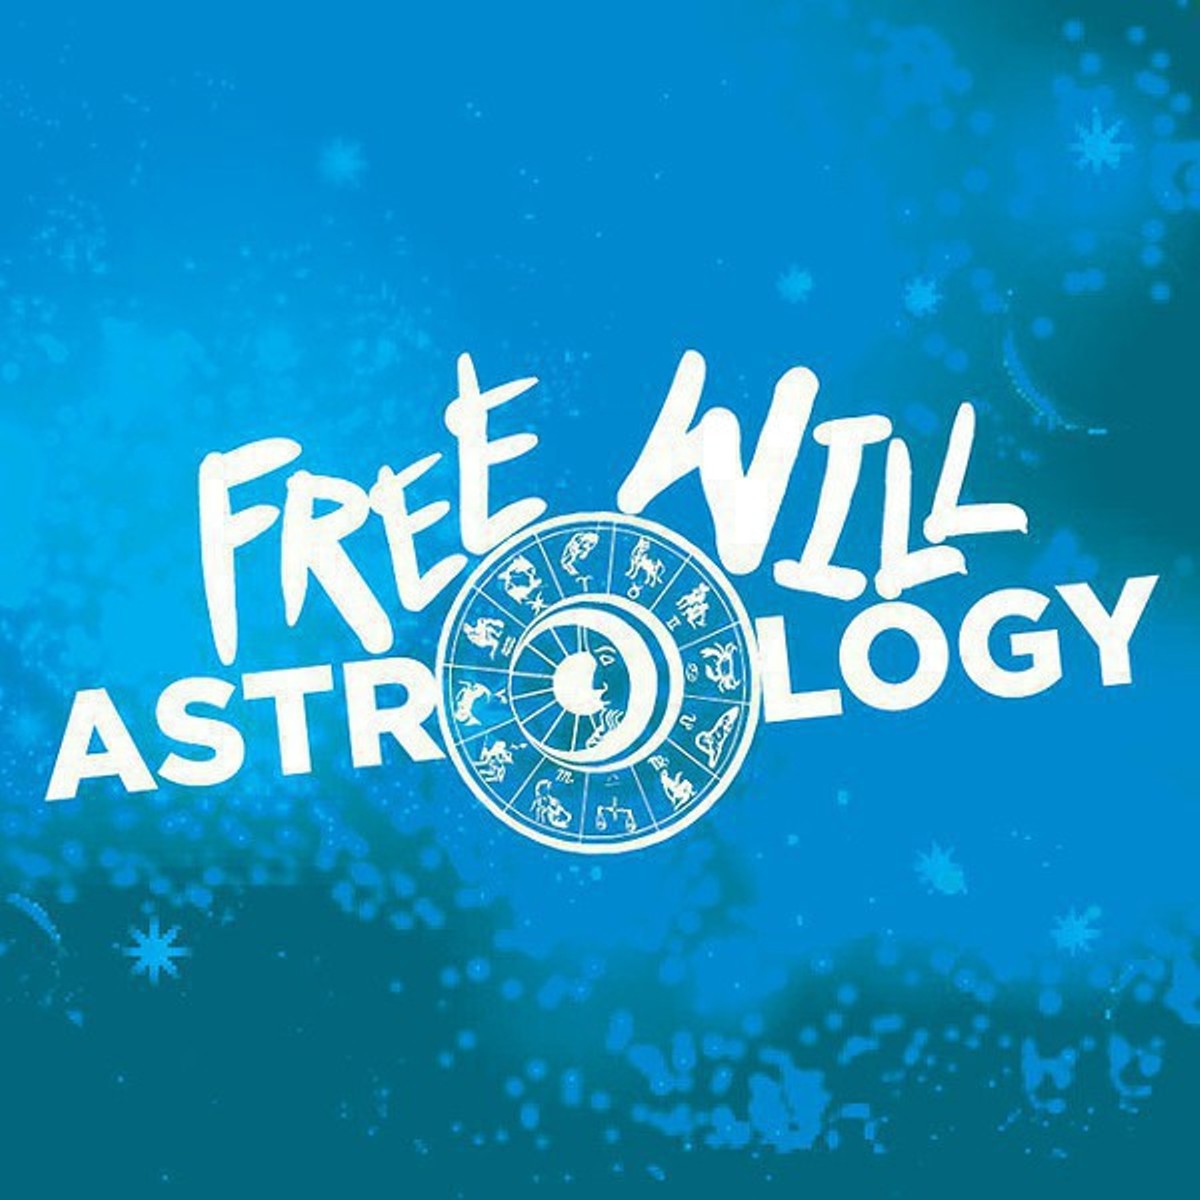 Free Will Astrology (4/20/16)